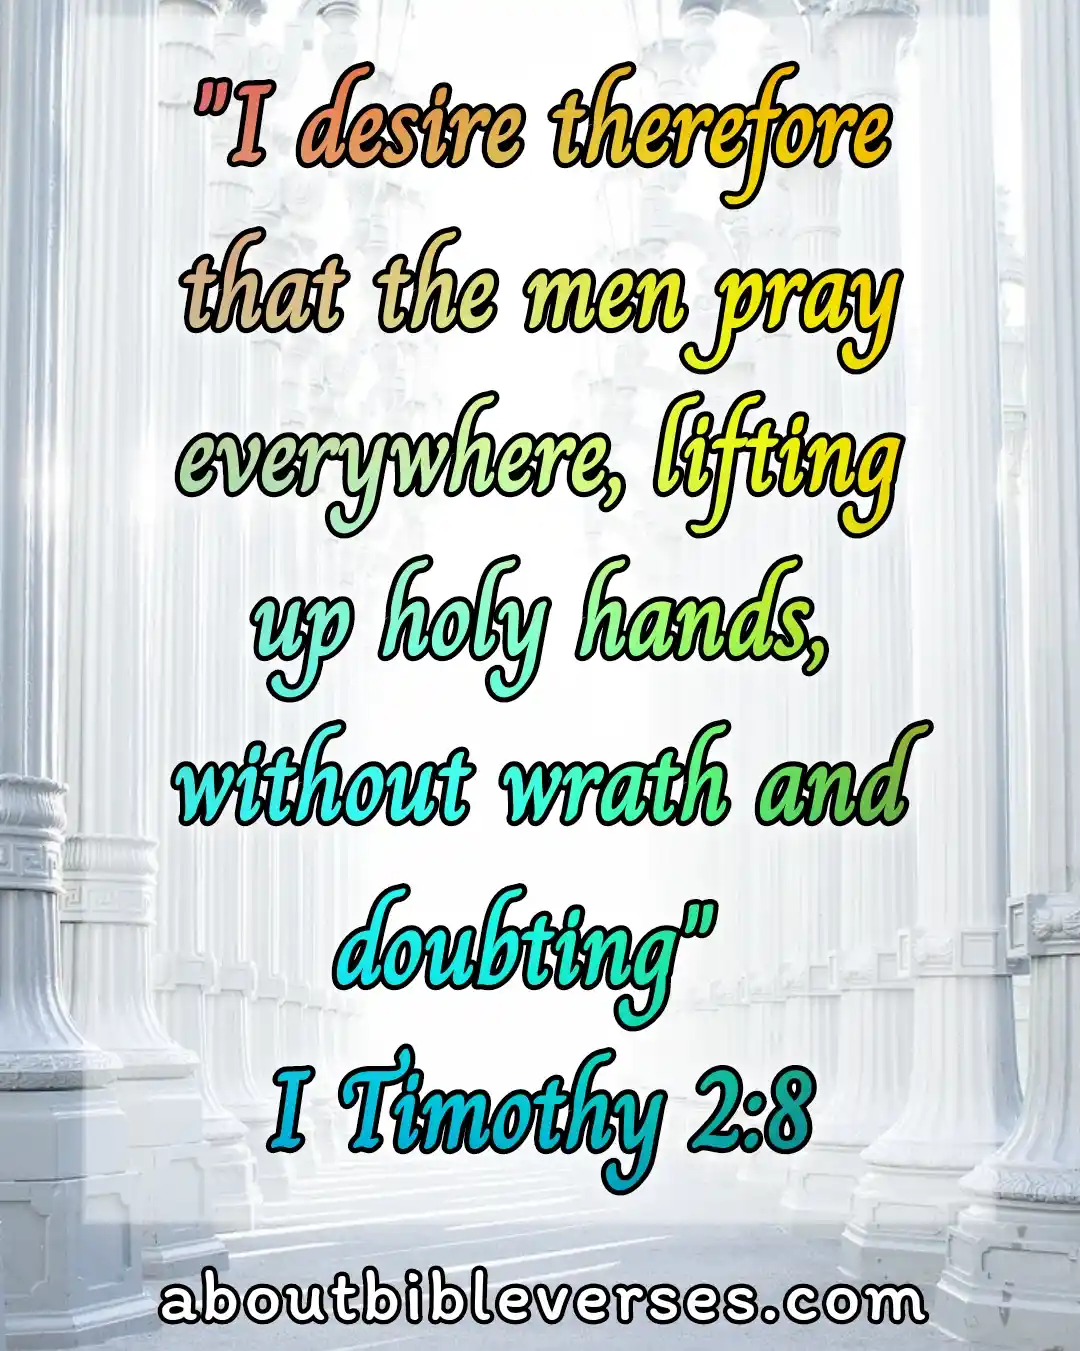 today bible verse (1 Timothy 2:8)